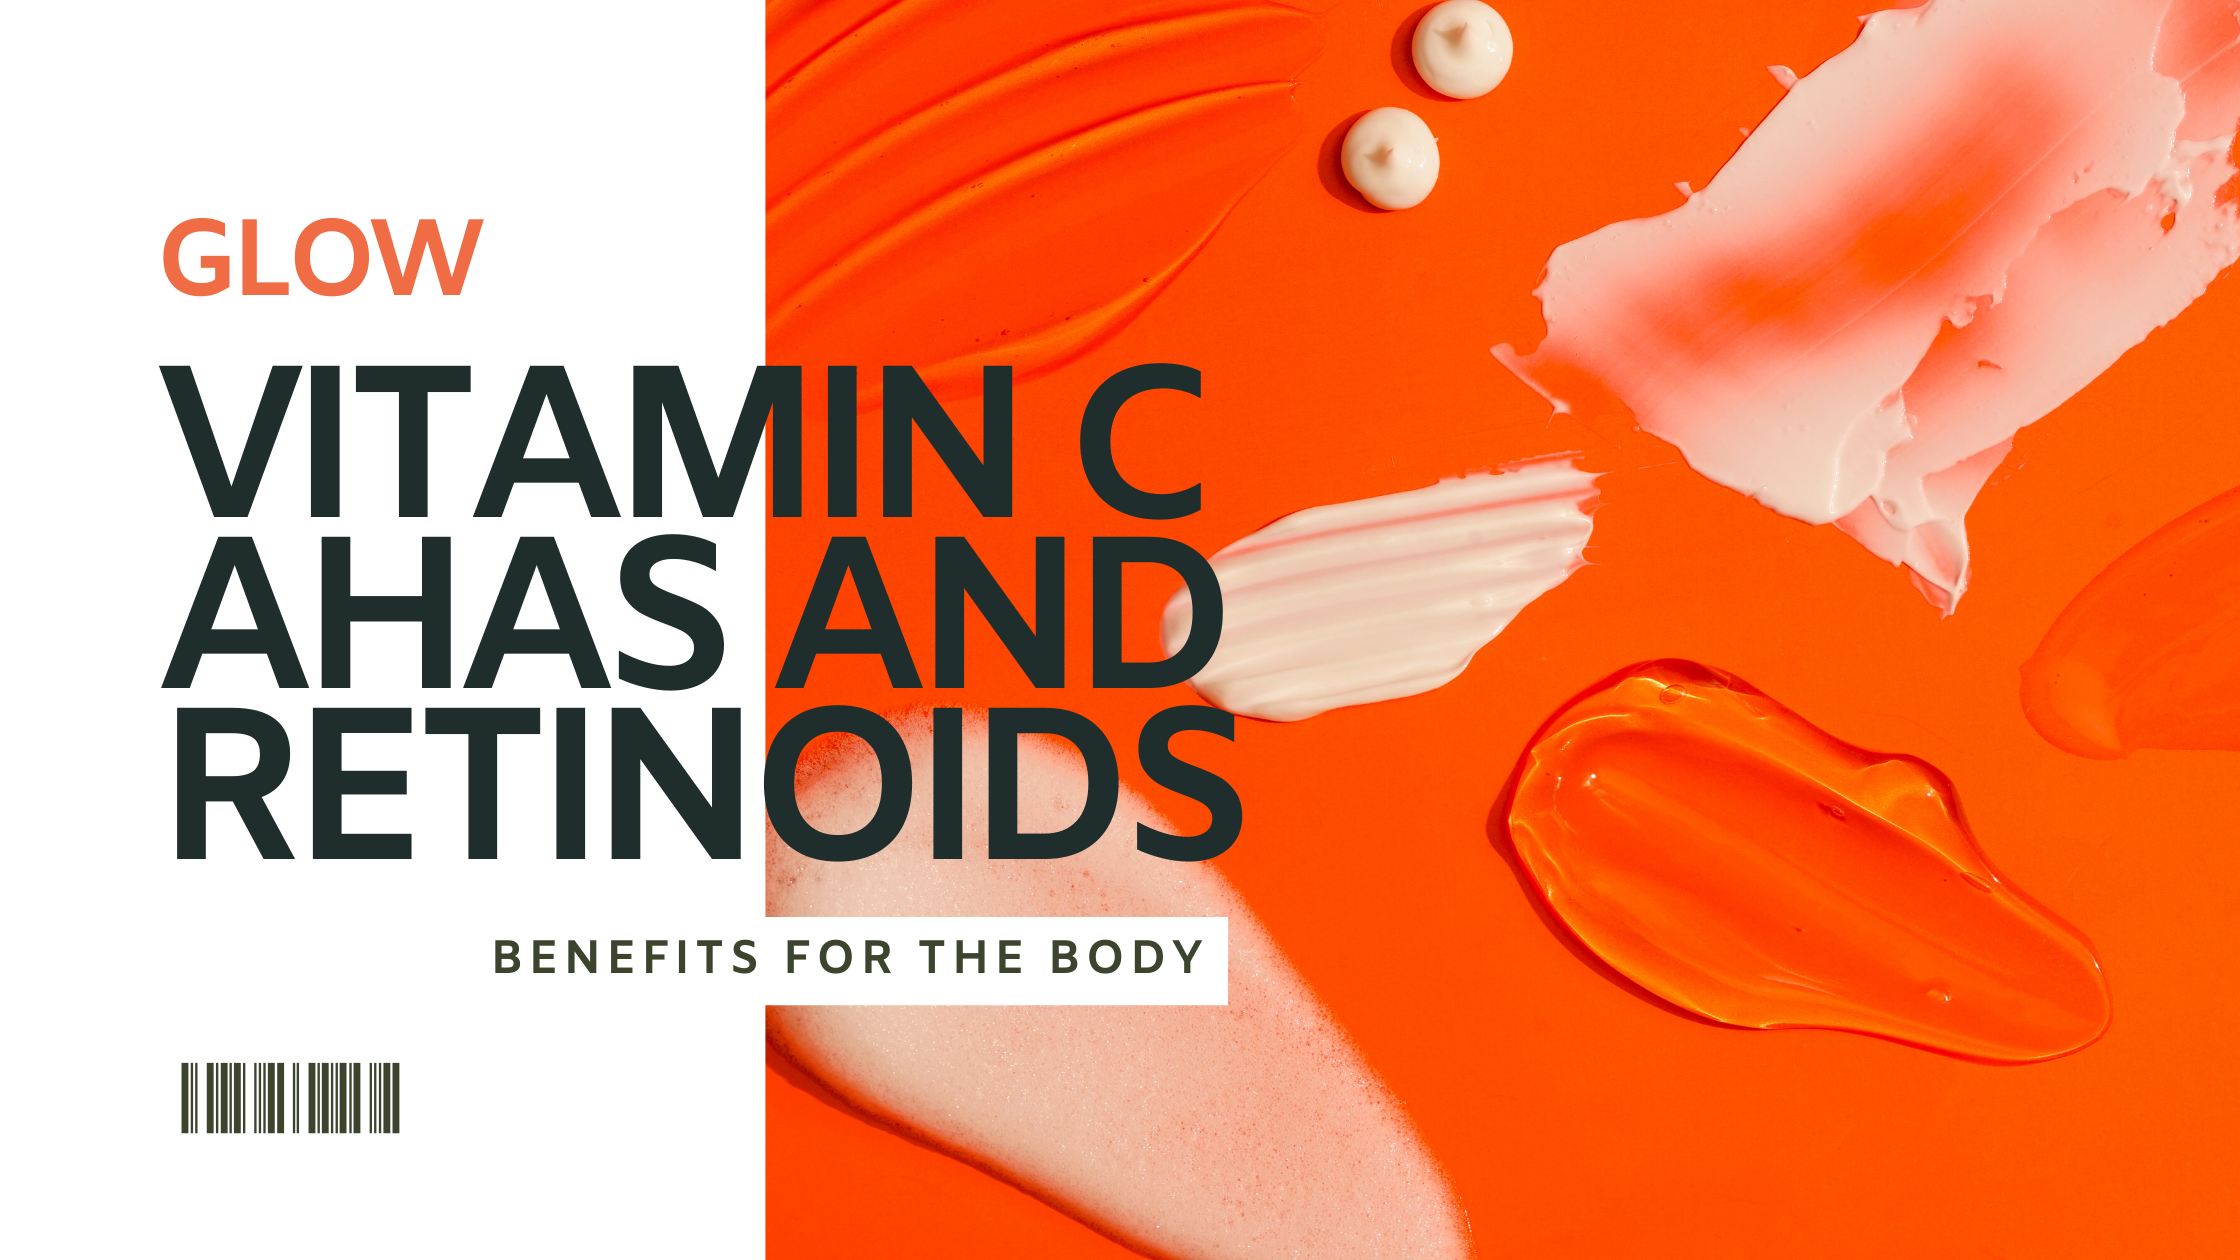 Glow From Head to Toe: The Body Benefits of Vitamin C, AHAs and Retinoids